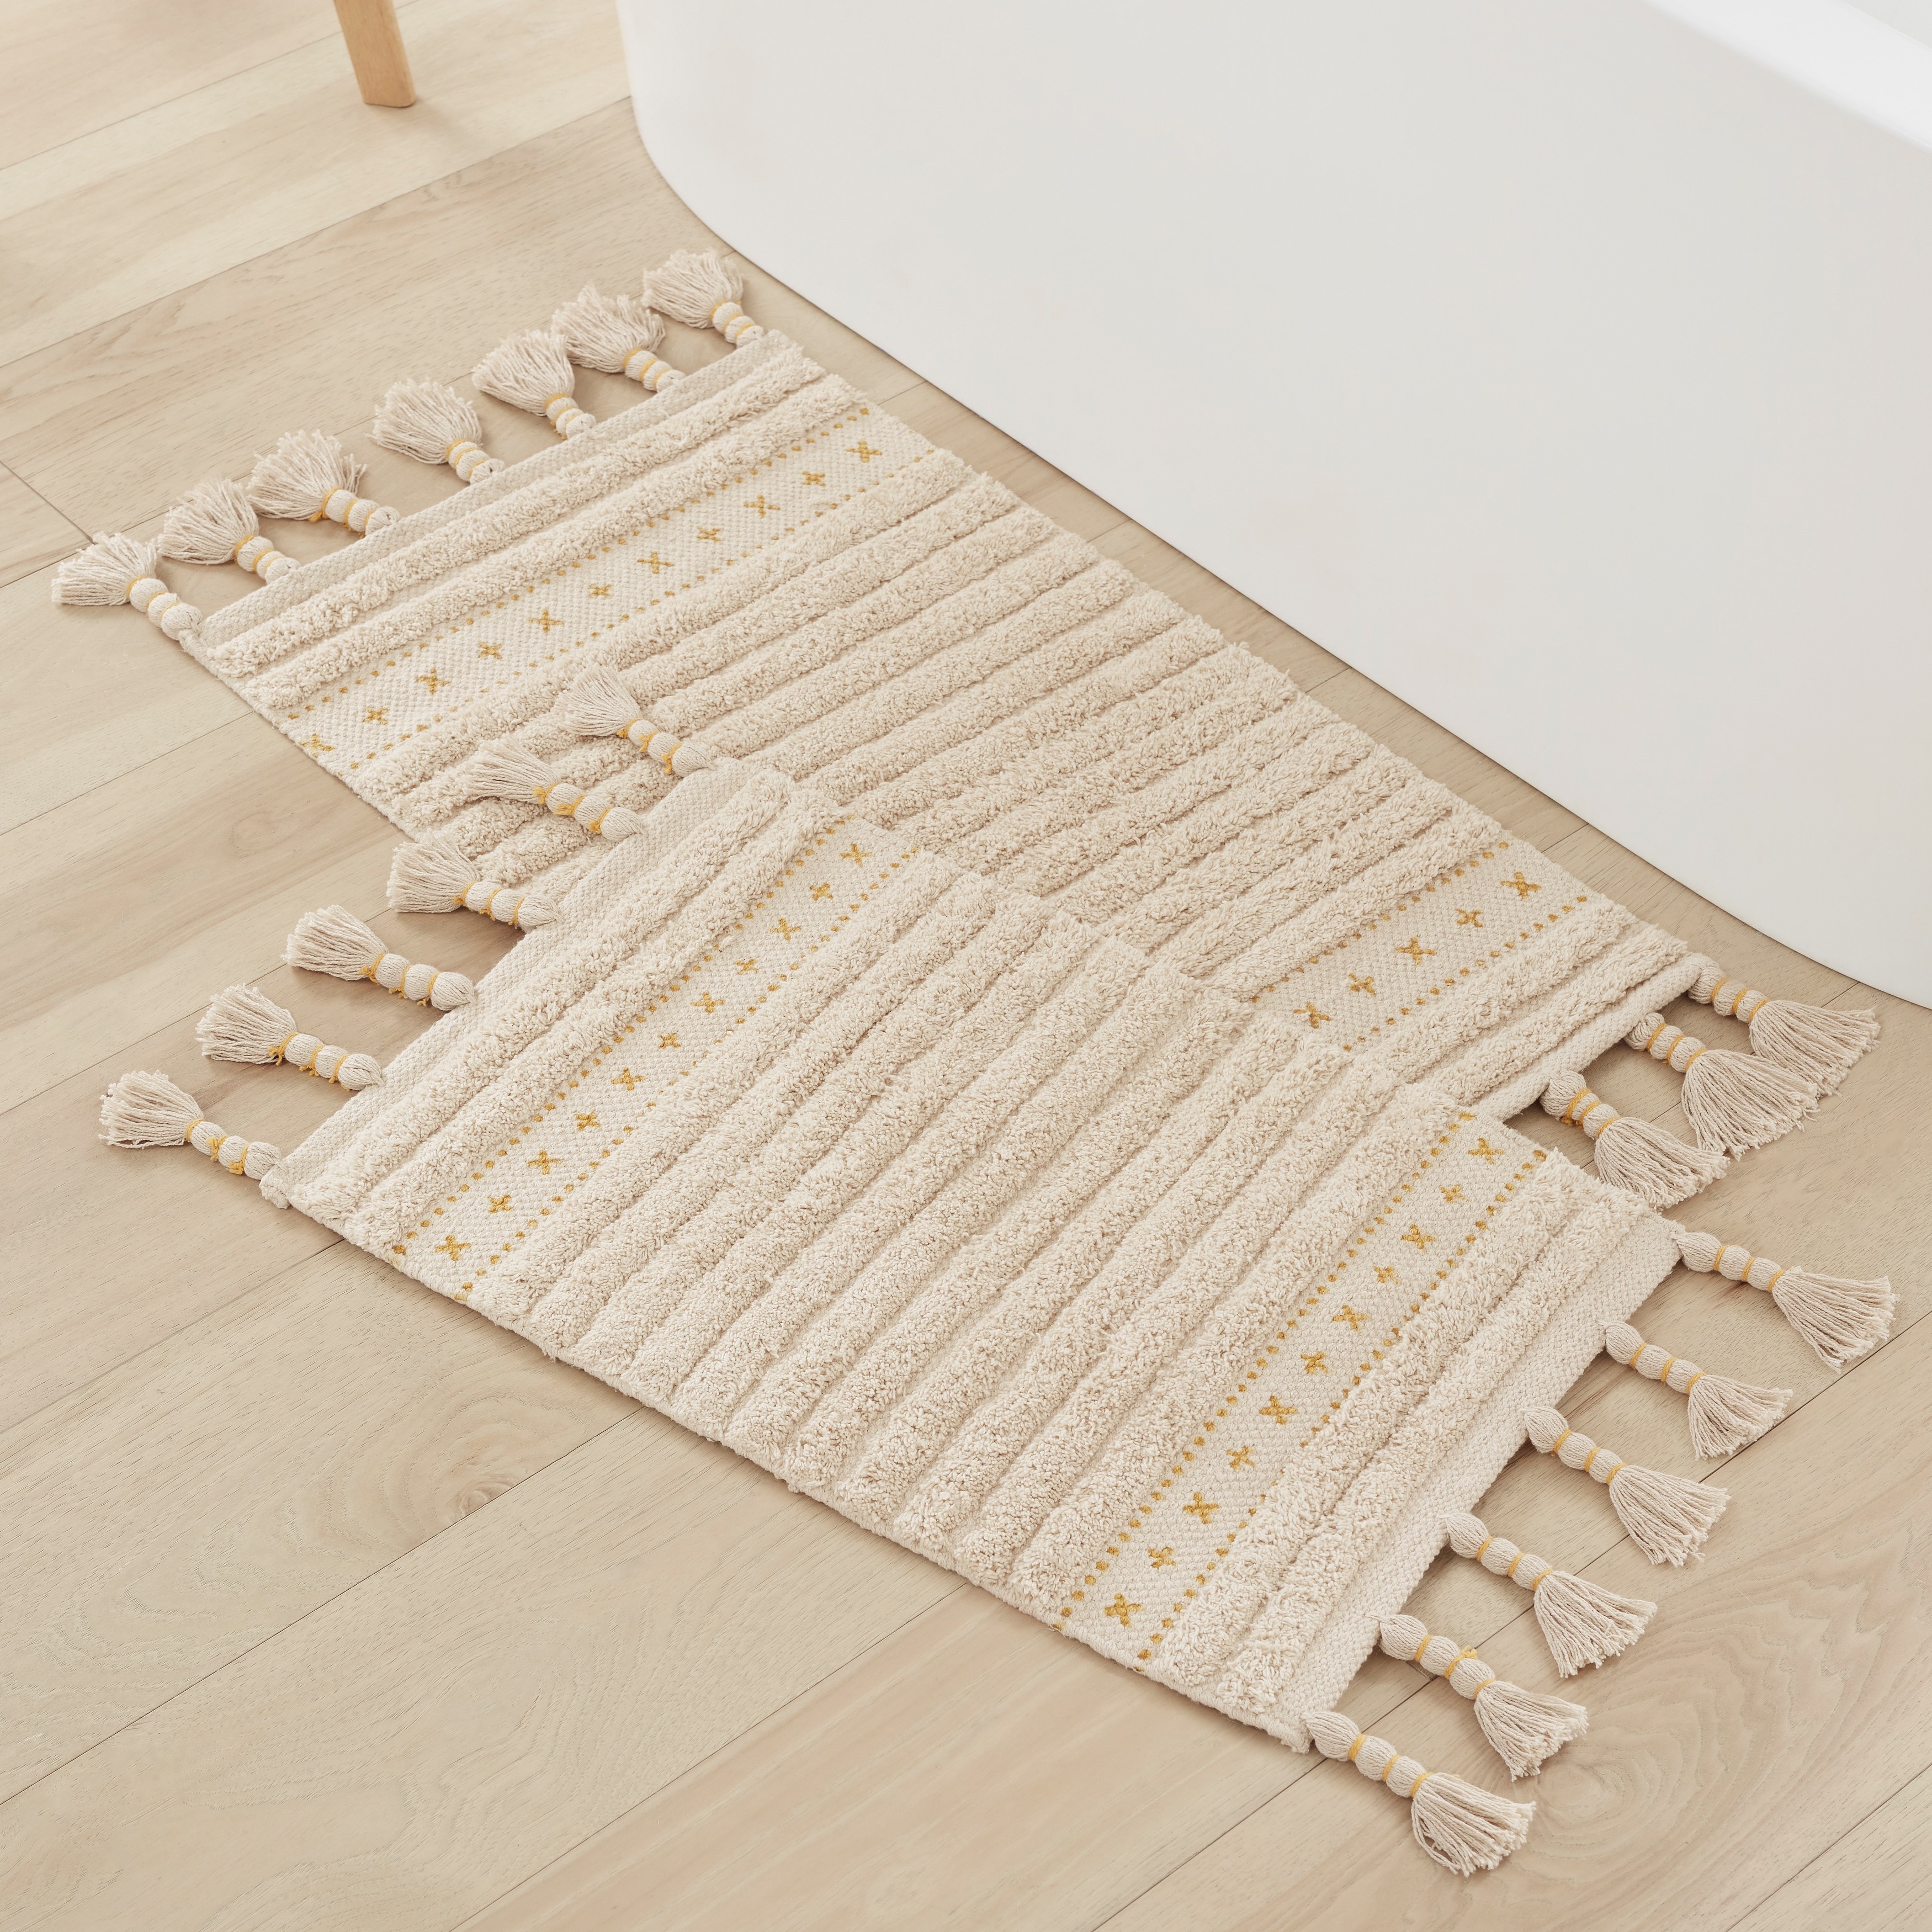 https://ak1.ostkcdn.com/images/products/is/images/direct/12ad056a3d0faa69d94c50d568e64e93d4e24834/Lucky-Brand-Overtufted-Cotton-Fringe-Boho-Bathroom-and-Home-Decor-Bath-Rugs.jpg